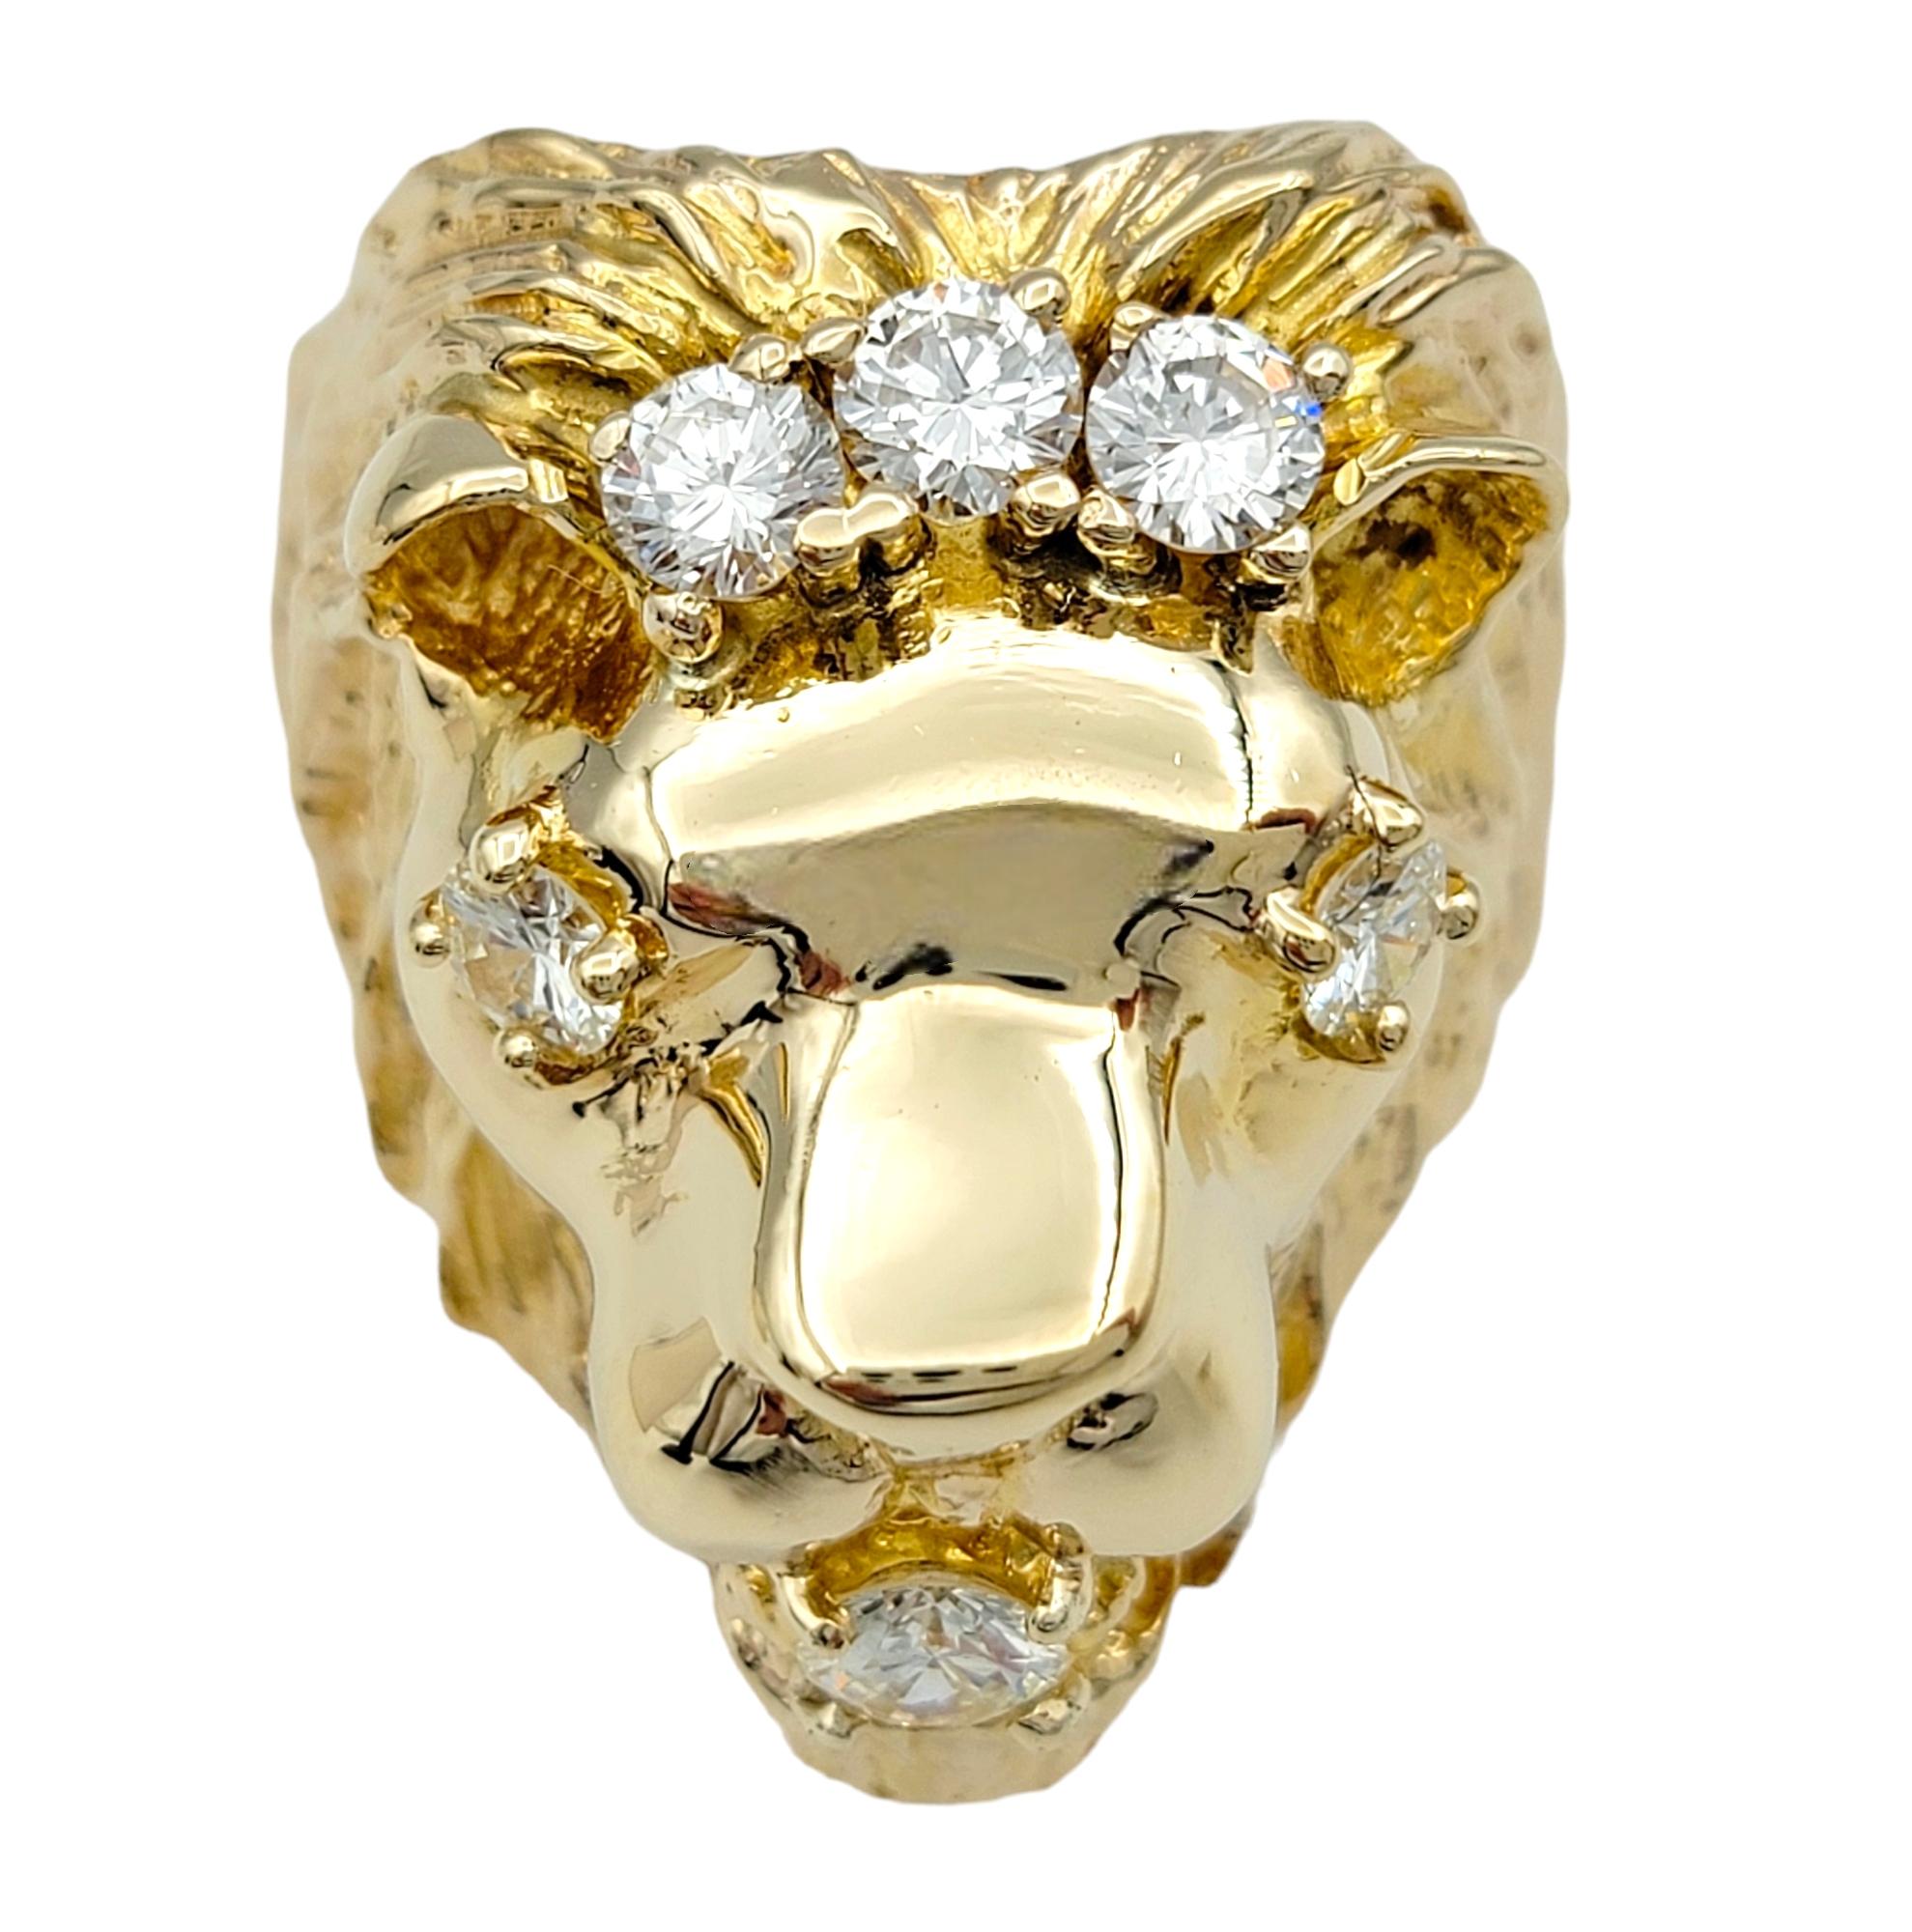 Ring Size: 9.75

This striking lion head ring commands attention with its fierce yet elegant design. Crafted from lustrous 14 karat yellow gold, the ring showcases exquisite detailing, creating a lifelike depiction of the lion's head. The lion is